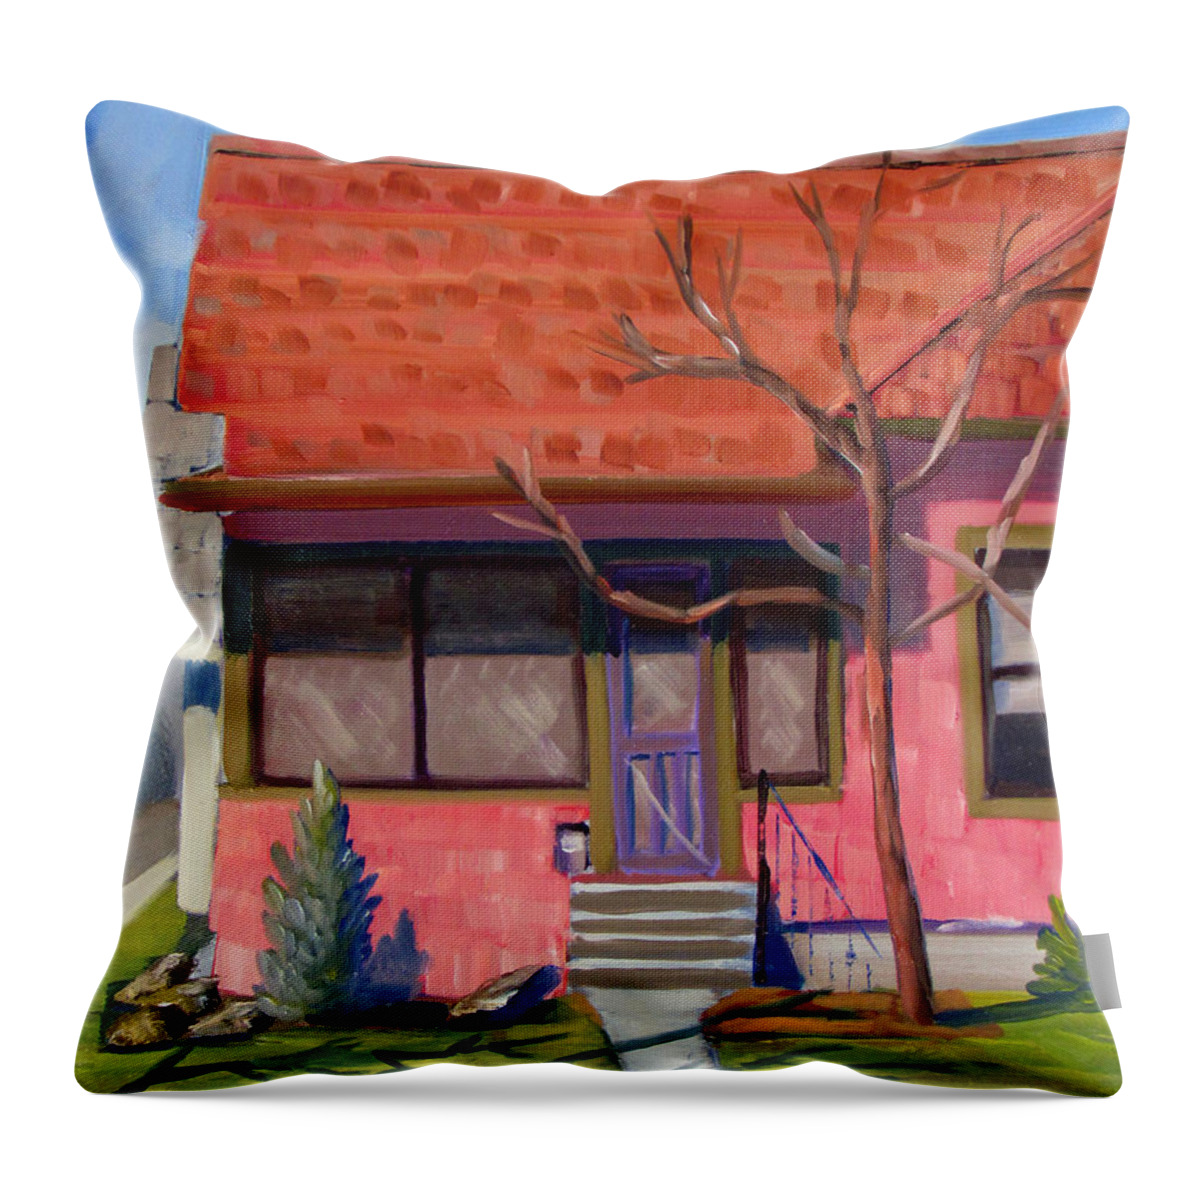 Boise Throw Pillow featuring the painting Boise Ridenbaugh st 02 by Kevin Hughes